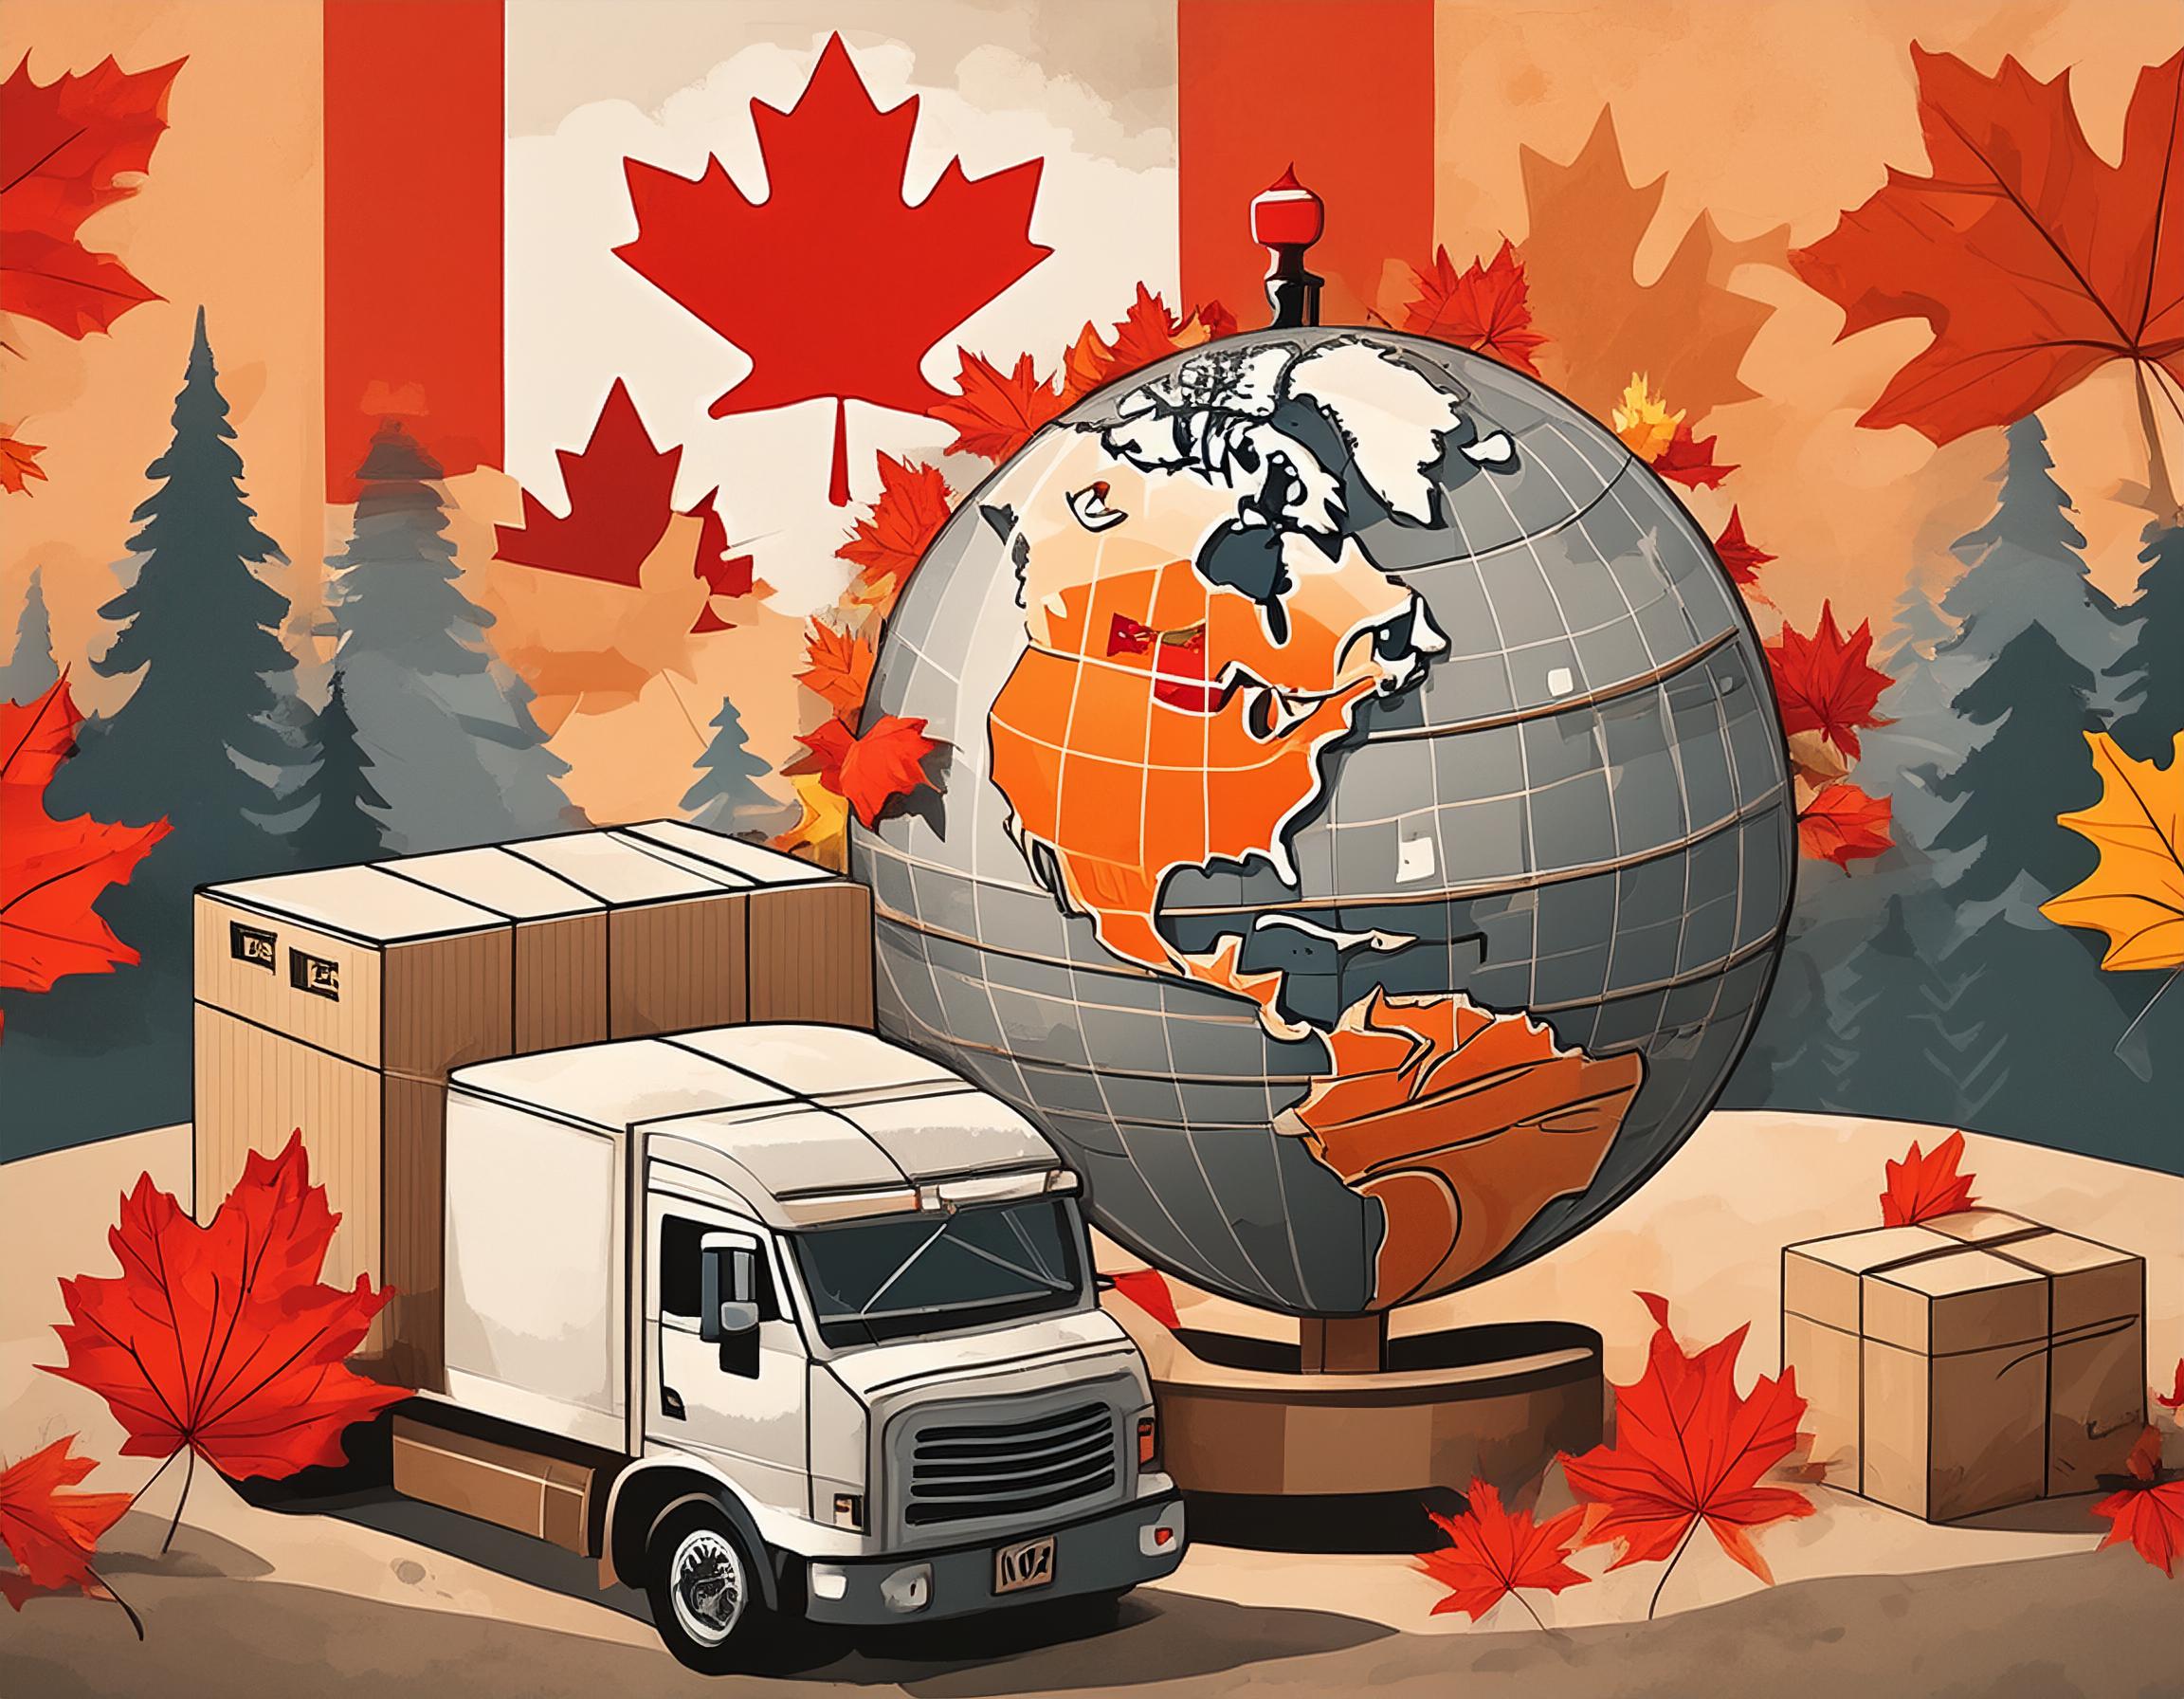 Collage of essential Canadian products including ketchup chips, Smarties, Tim Hortons coffee, cough syrups, vitamins, Canadian books and magazines, Roots clothing, Canada Goose jackets, and Lululemon athletic wear with elements of parcel forwarding.